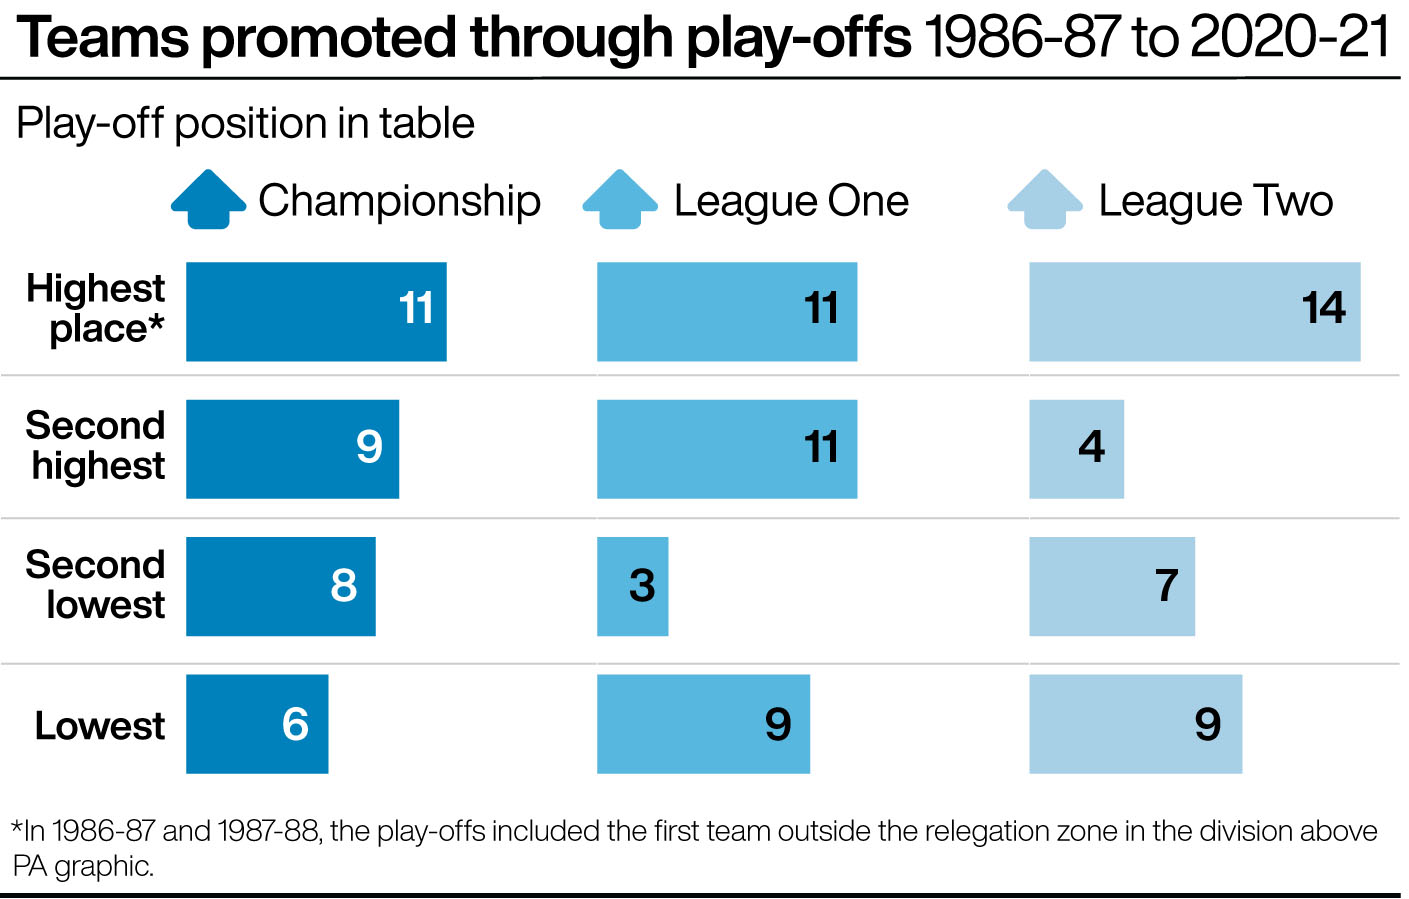 Play-off winners by position in league table